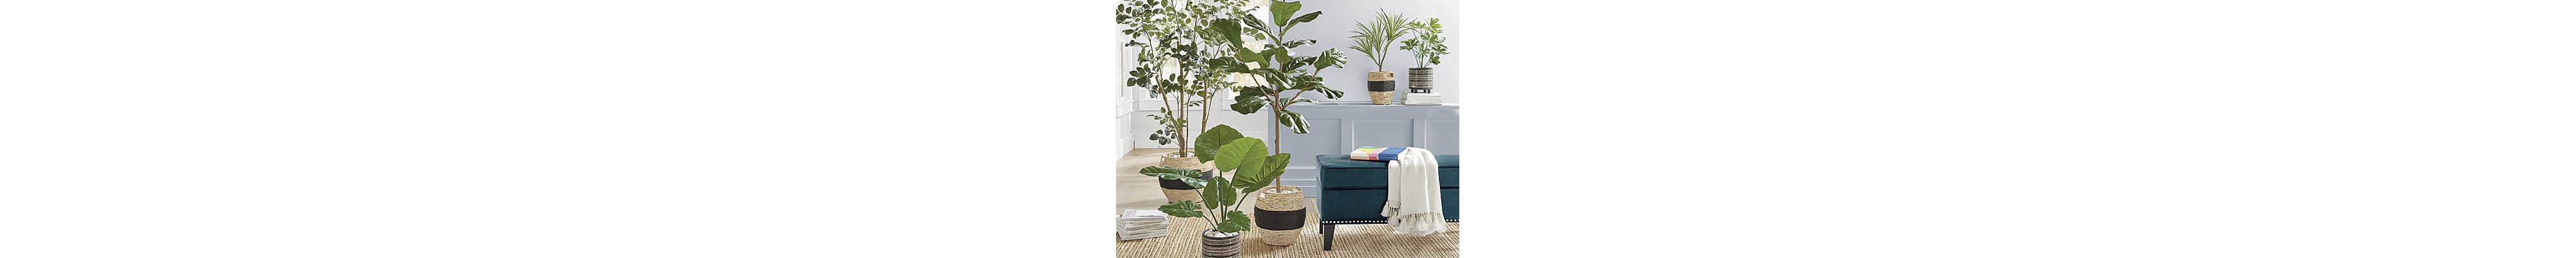 How to Use Artificial Plants Indoors - Grandin Road Blog